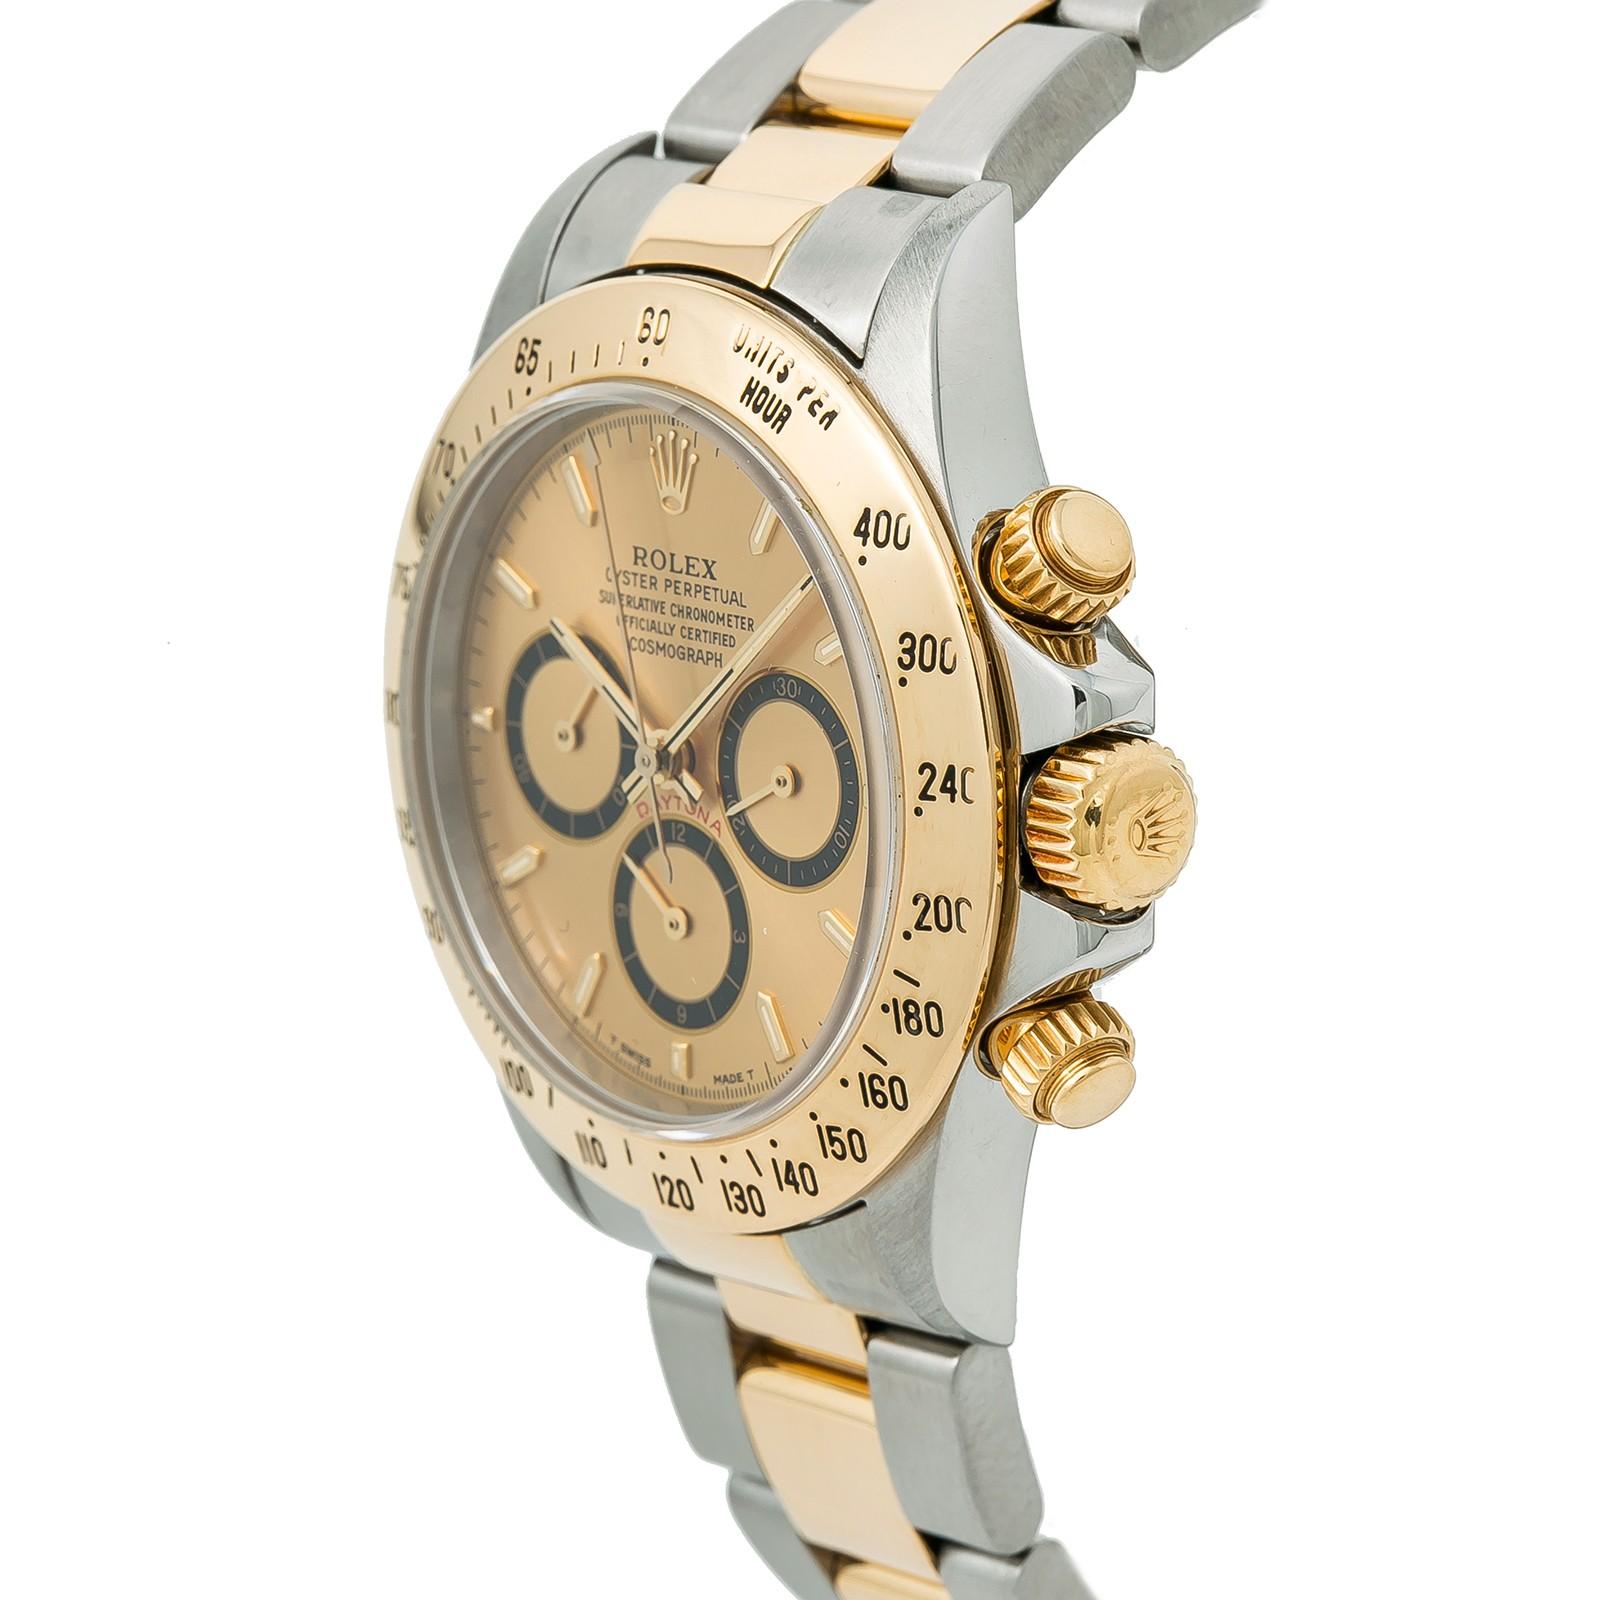 Contemporary Certified Rolex Daytona Zenith Inverted 6 16523 Men’s Automatic Watch For Sale